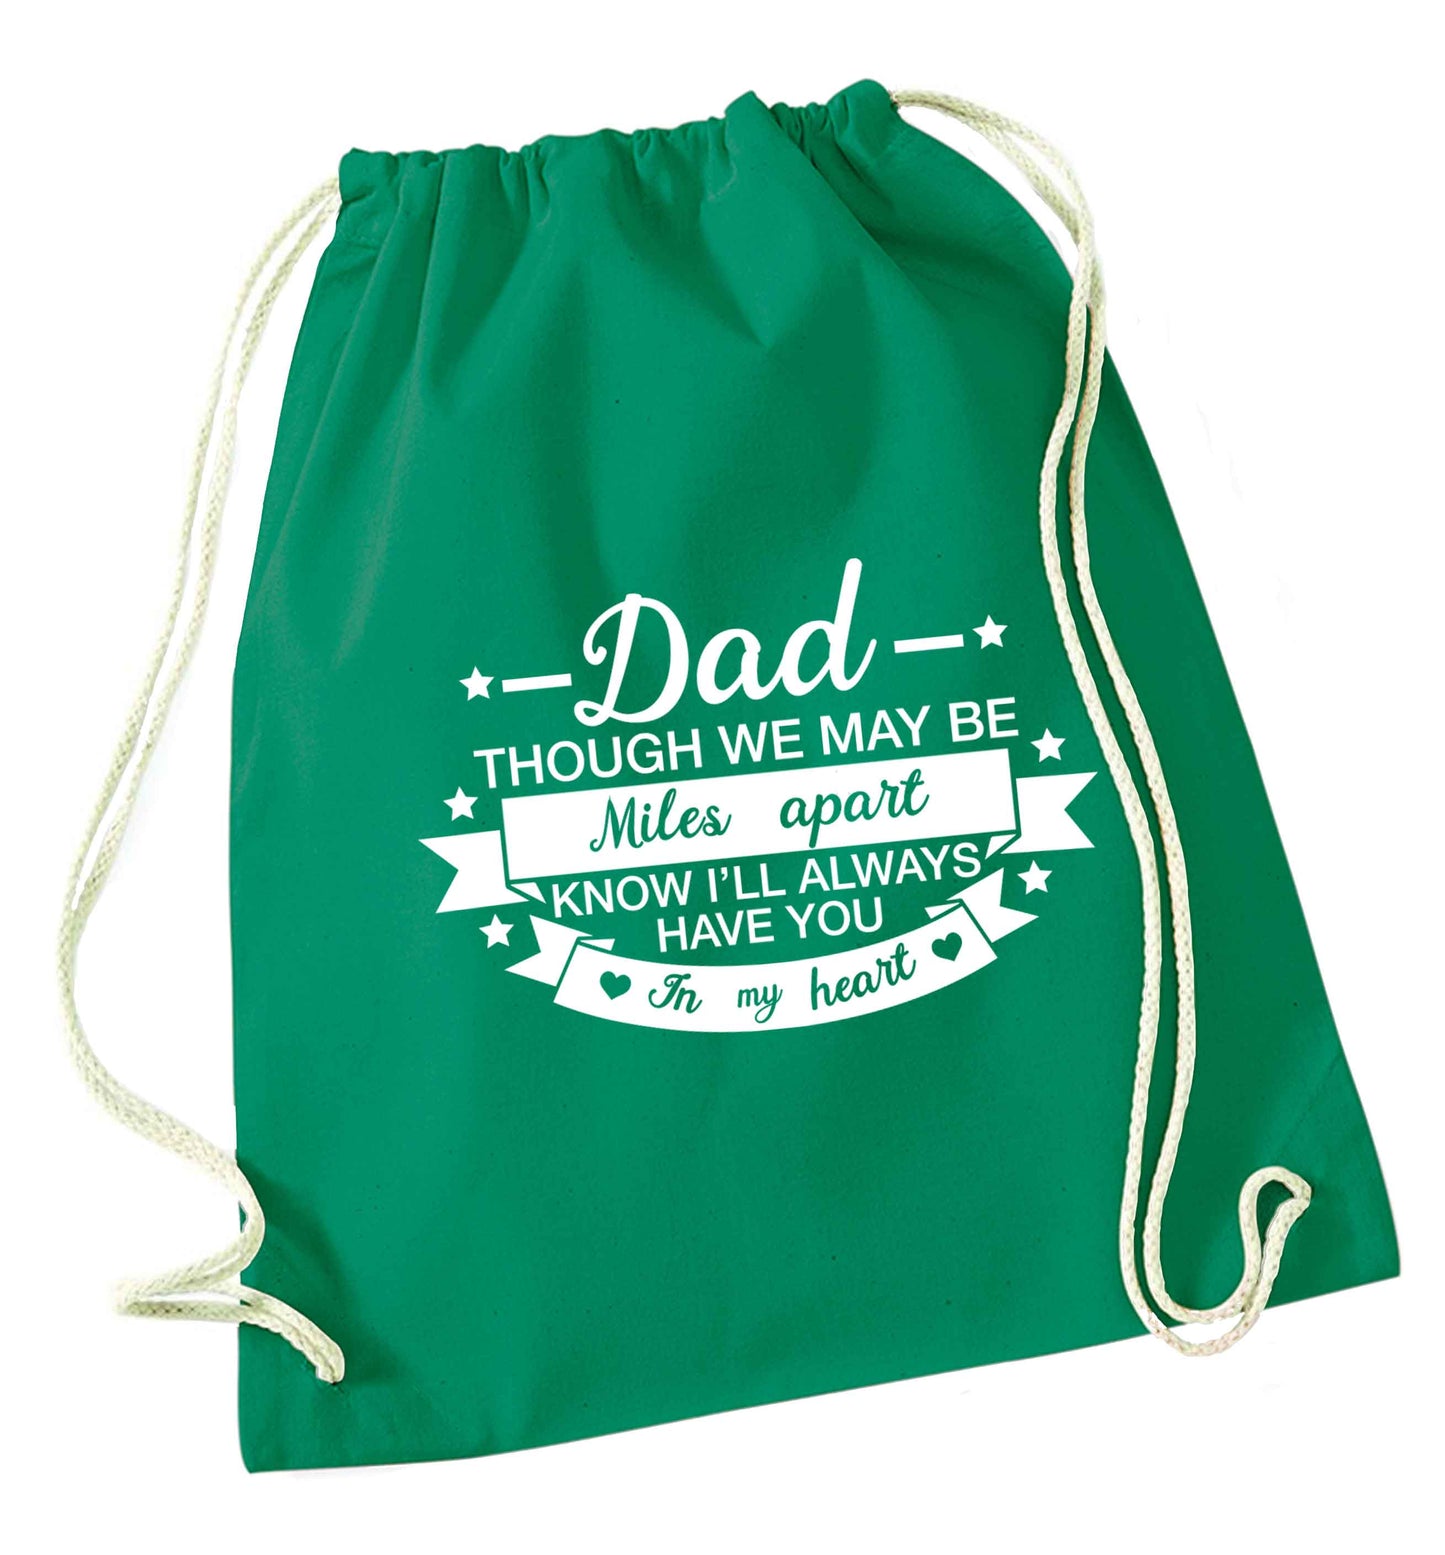 Dad though we are miles apart know I'll always have you in my heart green drawstring bag